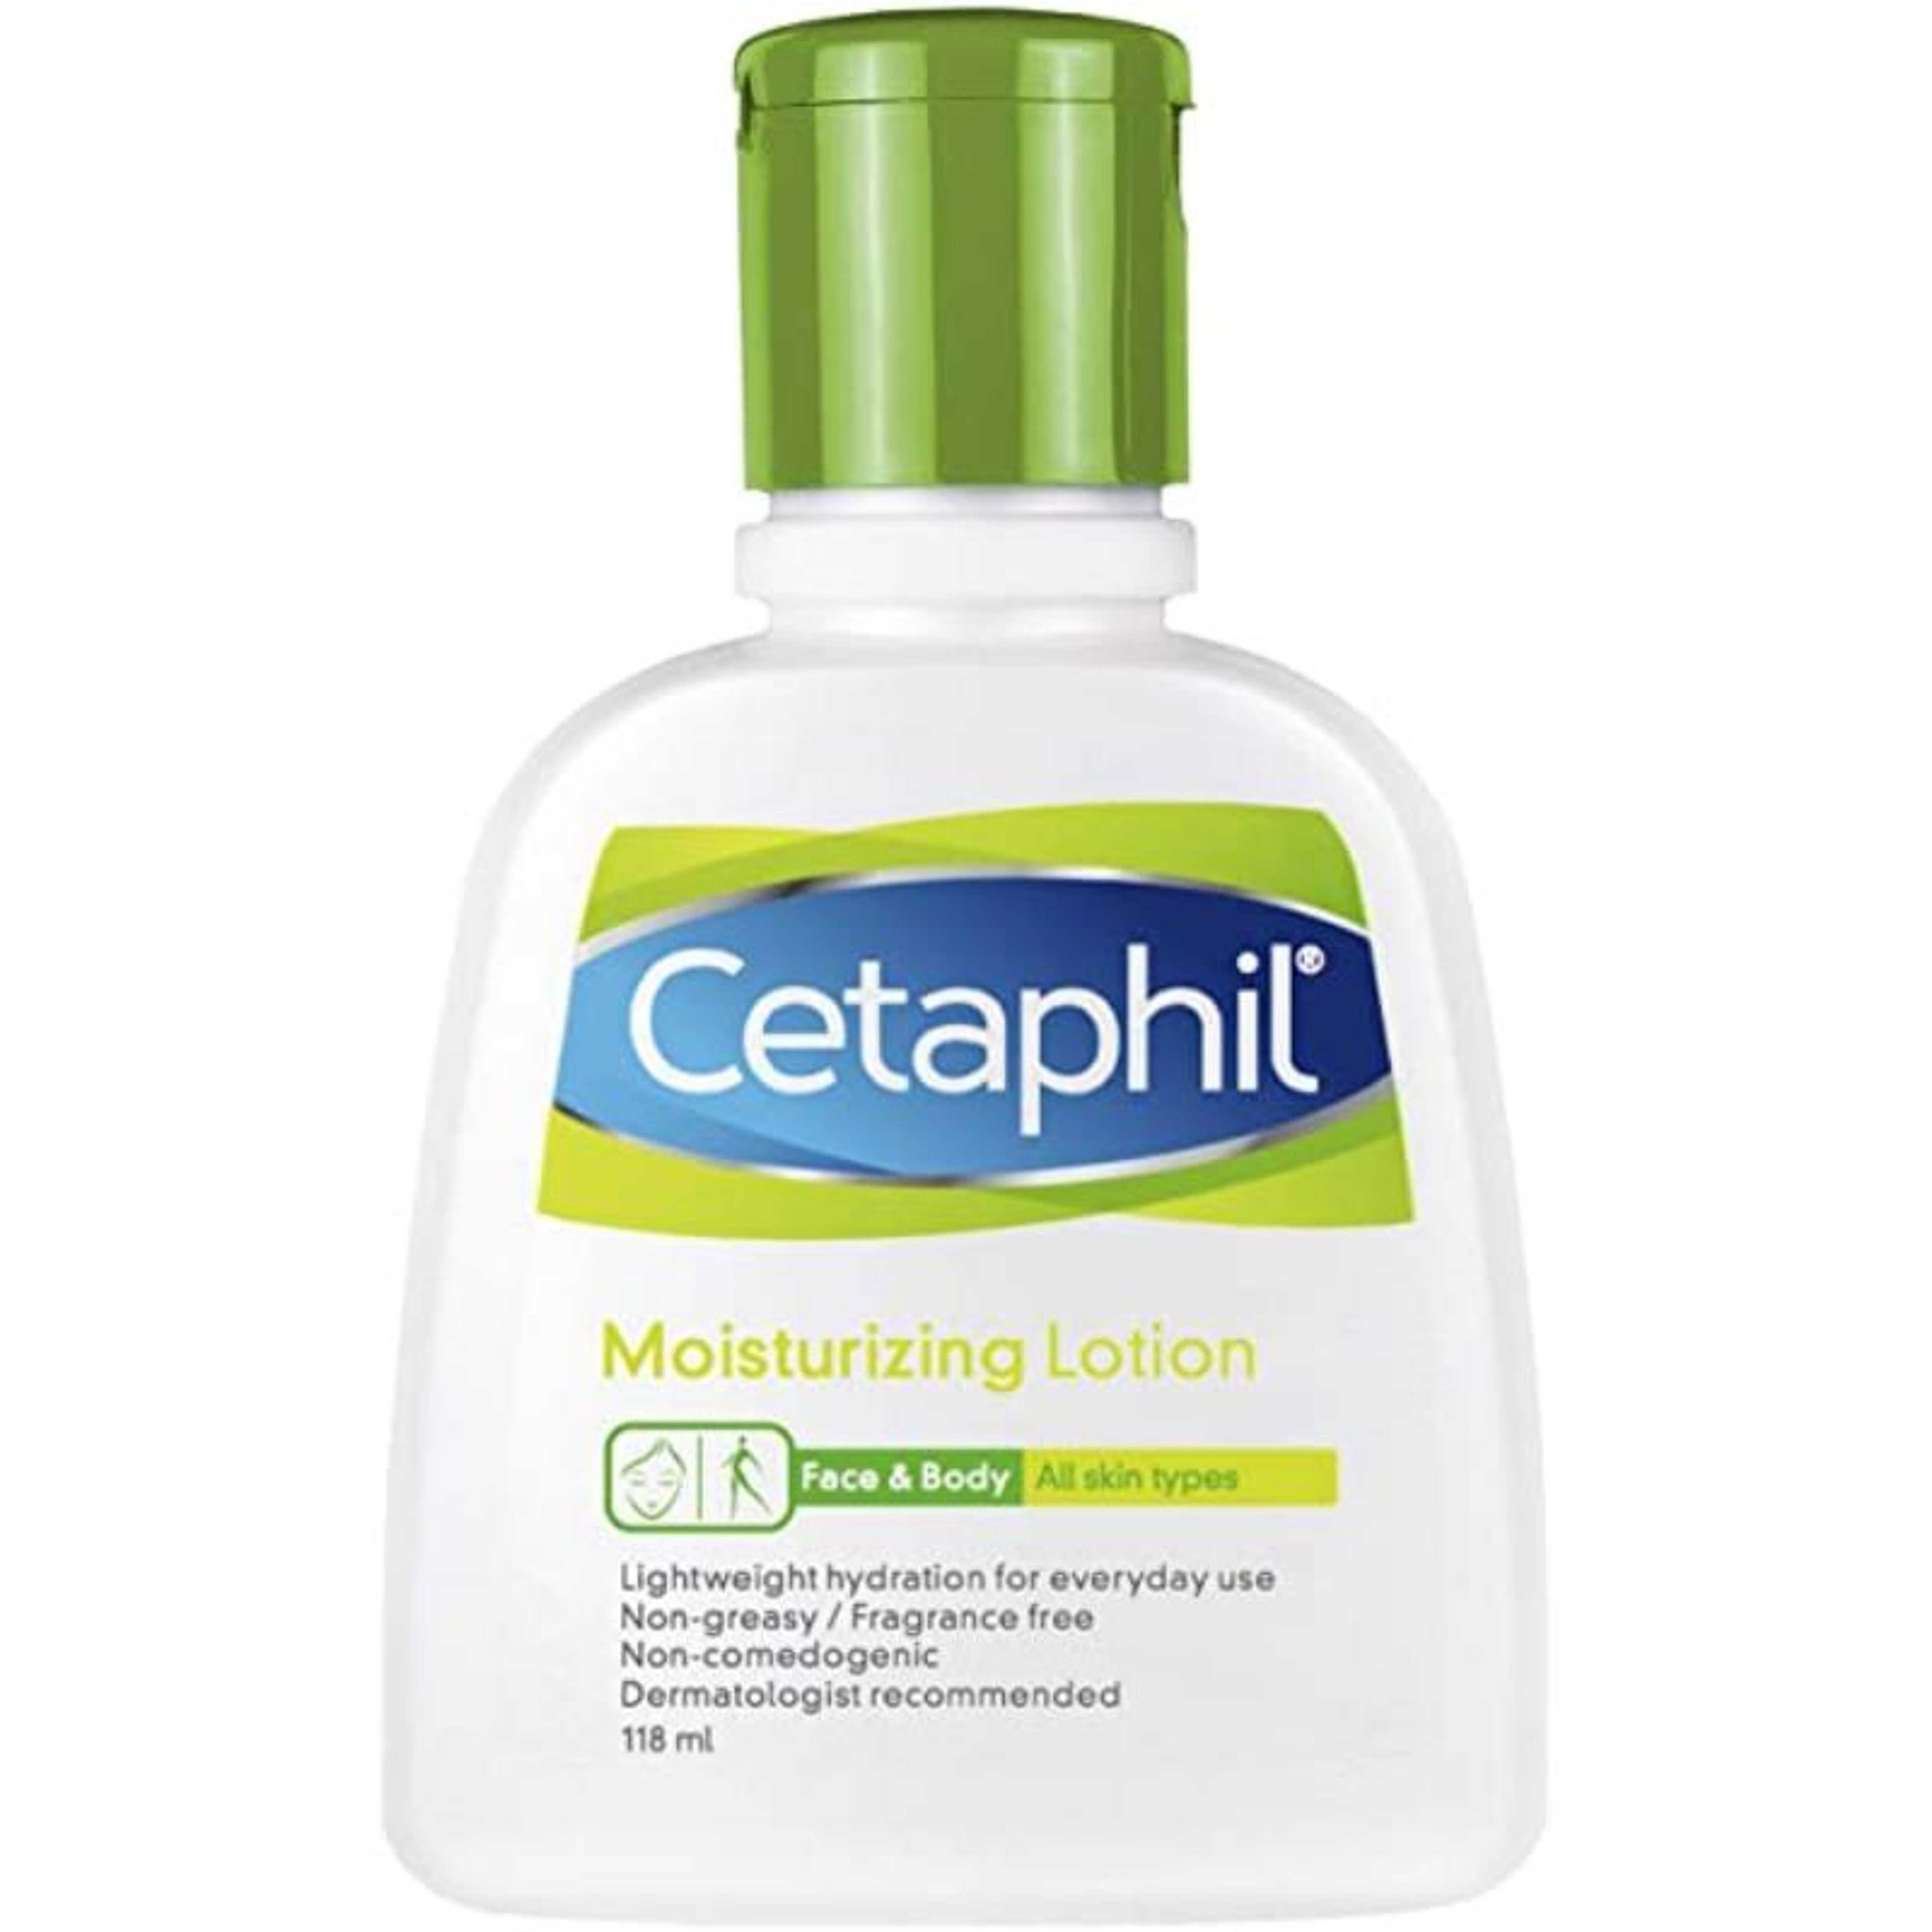 "Cetaphil Moisturizing Lotion 118ml For Face and Body All Skin Types - Cetaphil Lotion - Cetaphil Moisturizer "